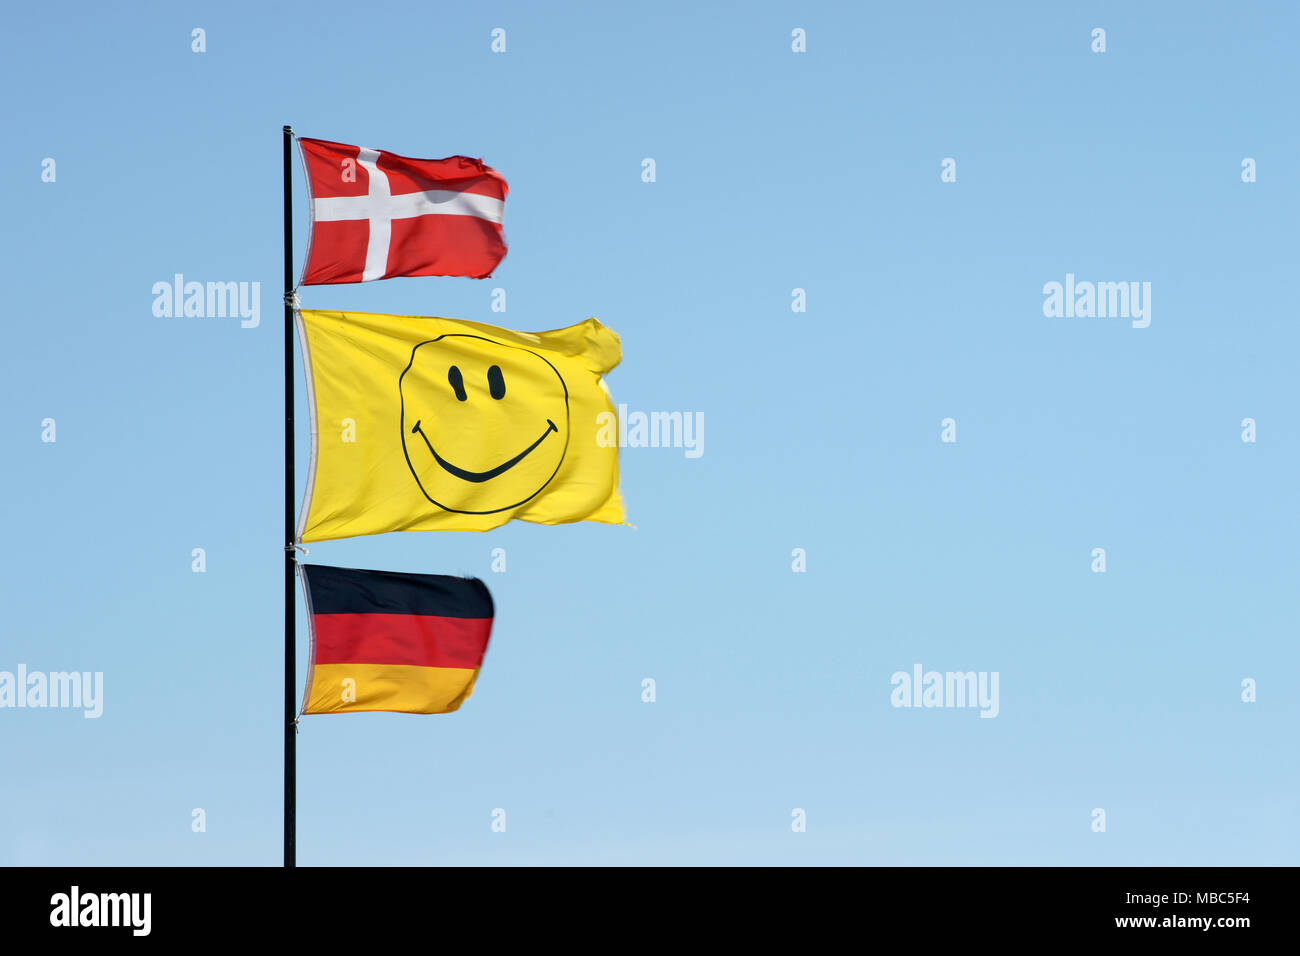 German and Danish flags waving together with a smiley flag on a flagpole Stock Photo